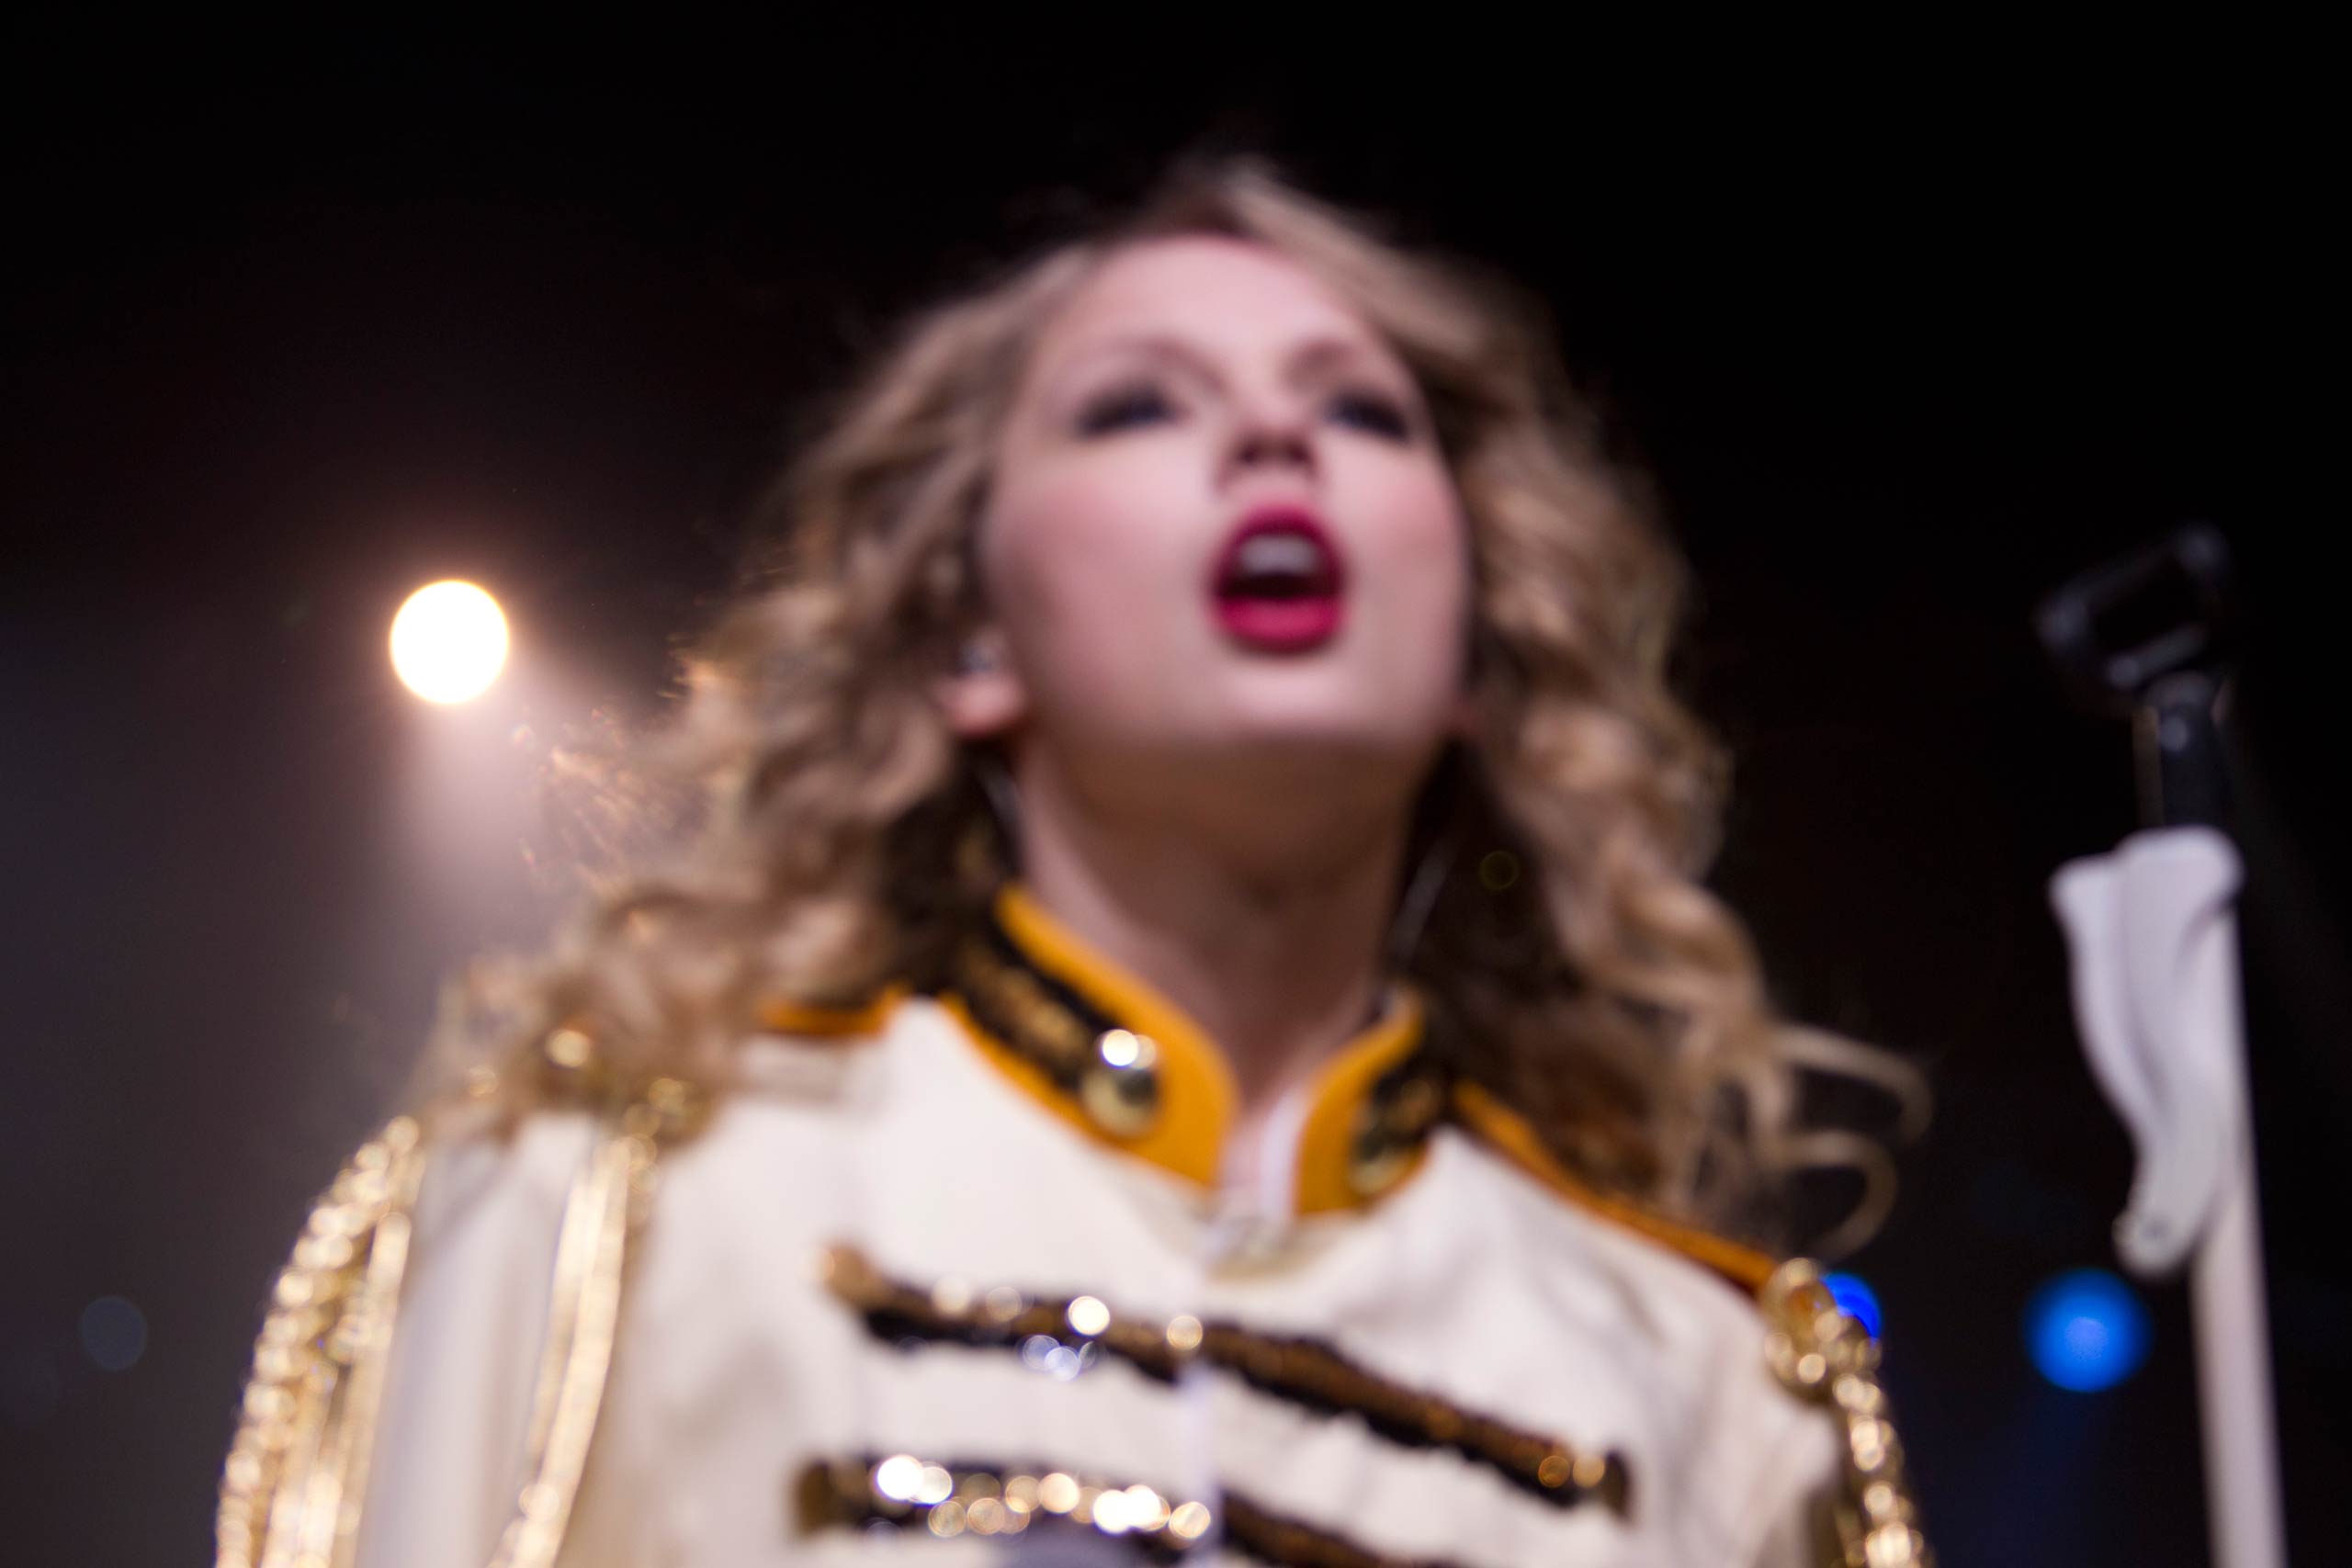 Taylor Swift performs during her Fearless tour in Auburn Hills outside Detroit, Mich. on March 23, 2010.